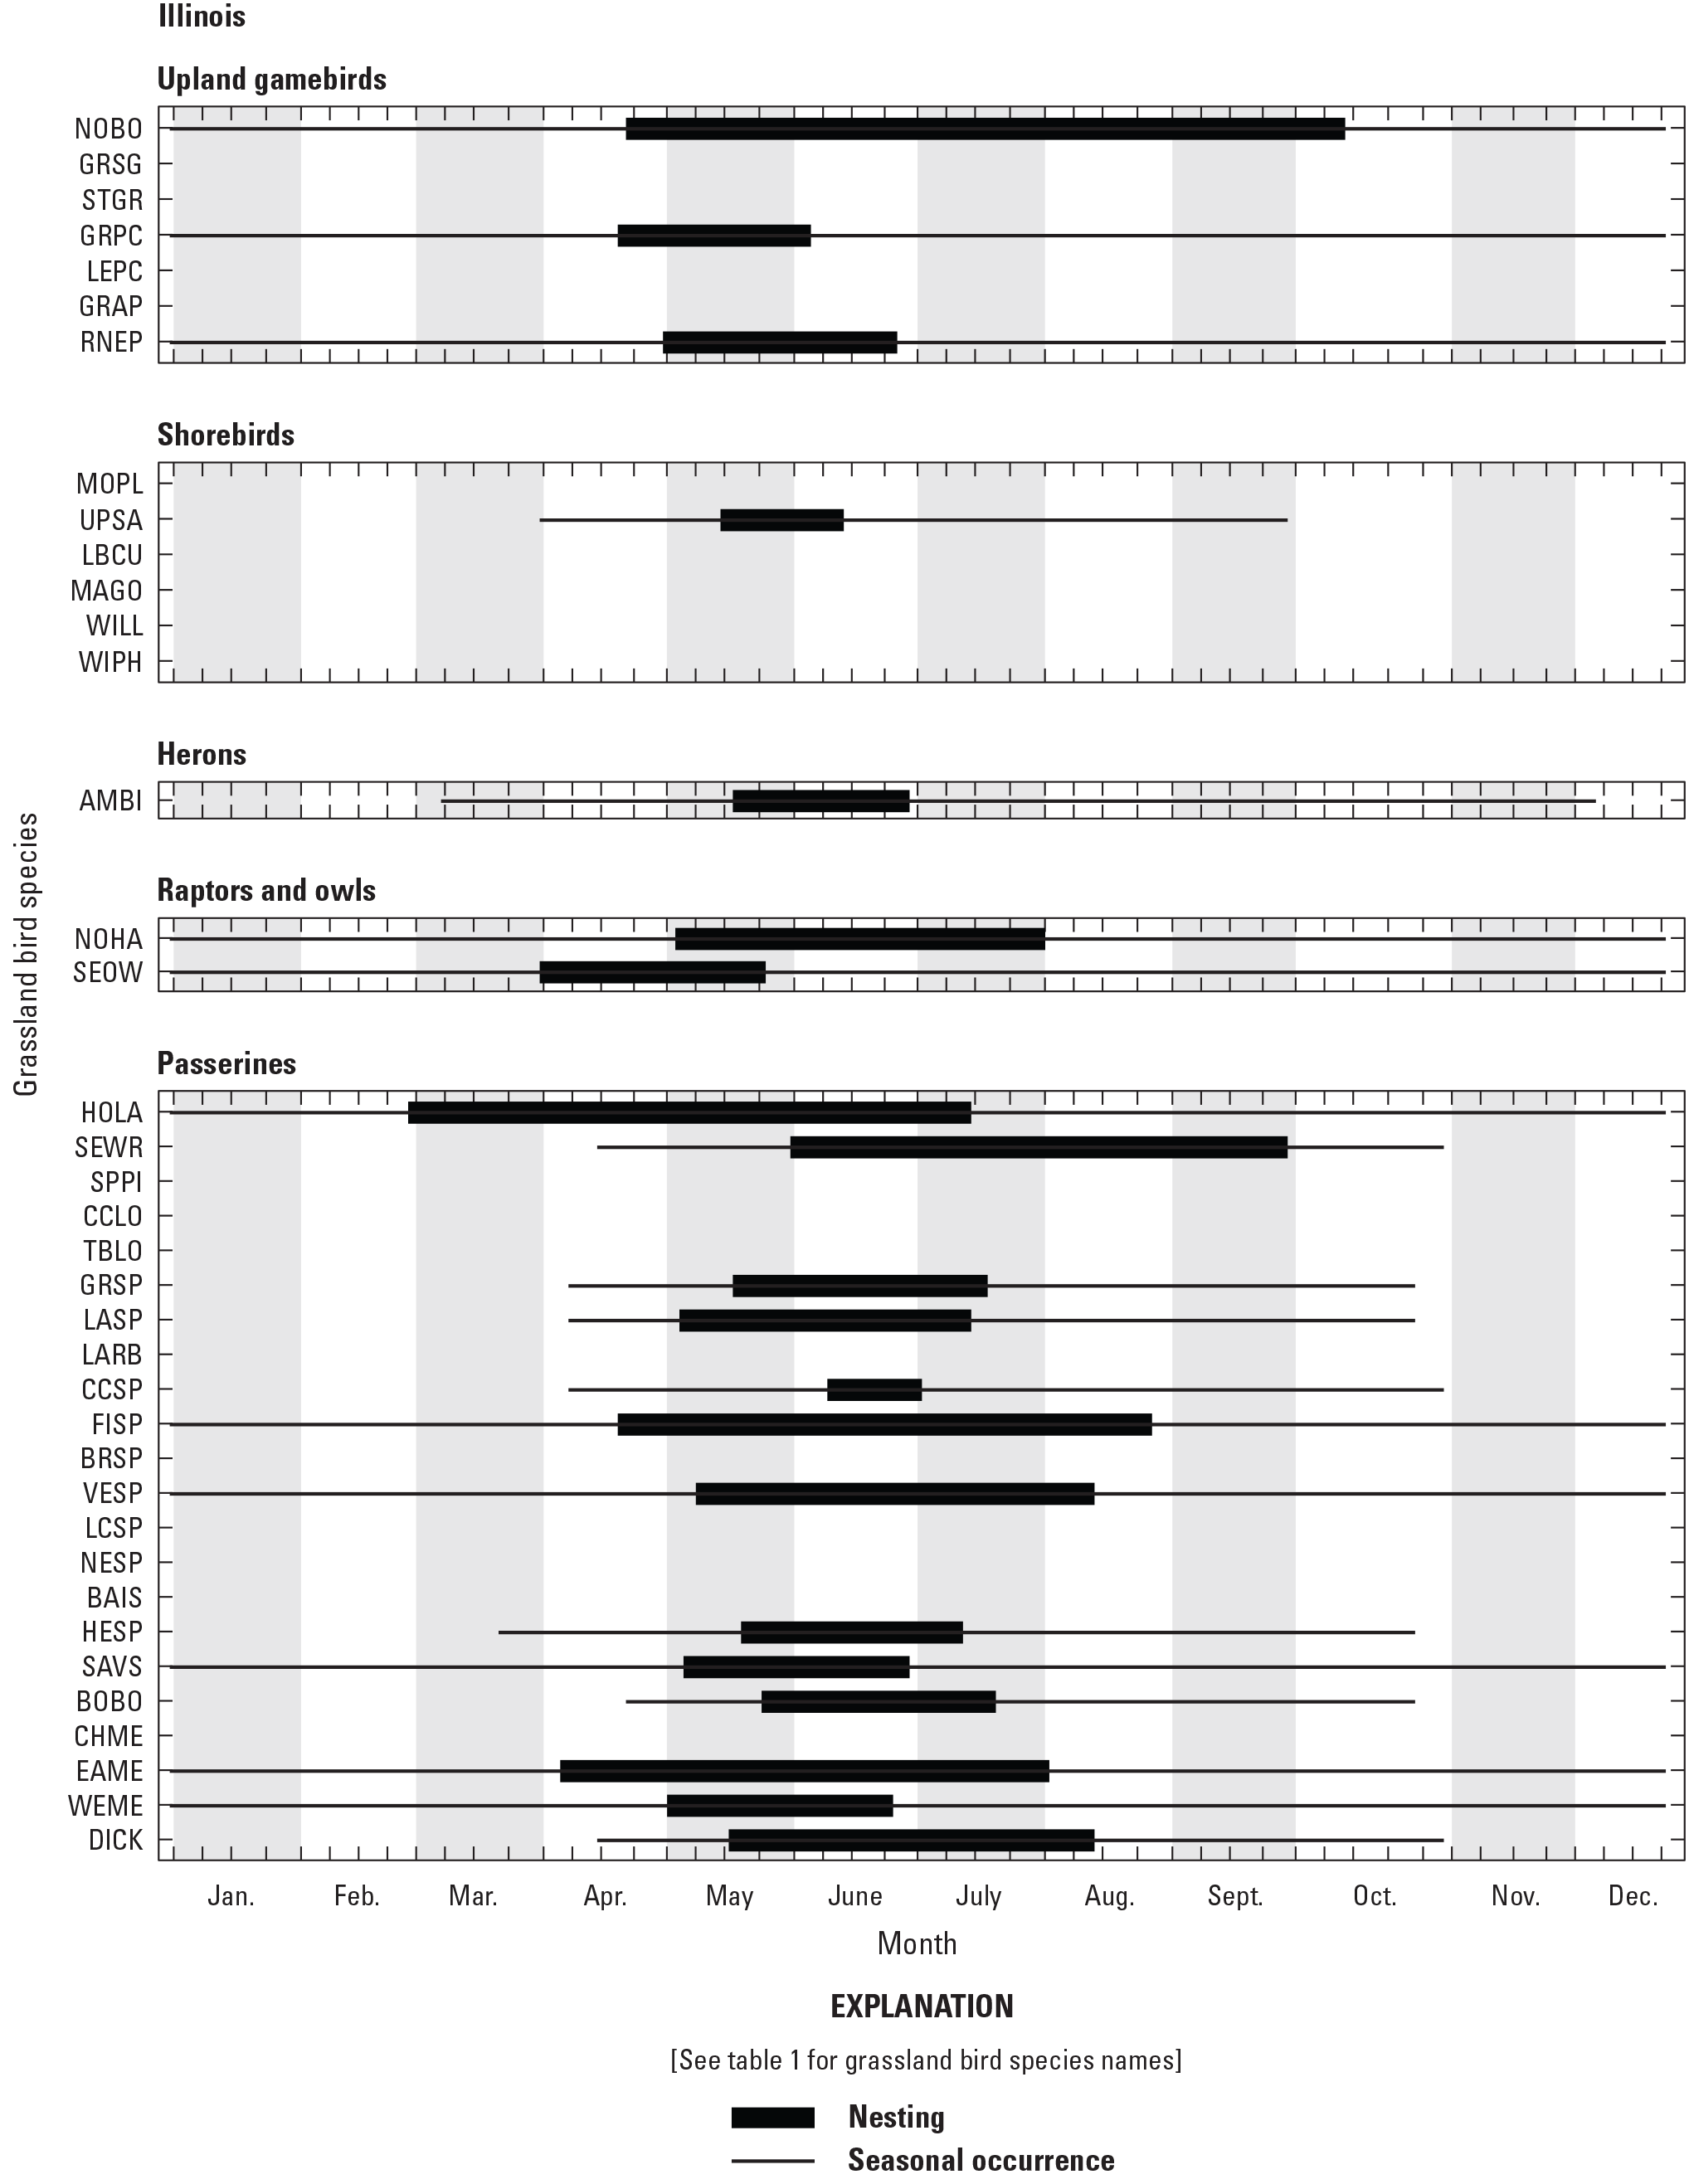 Figure showing seasonal occurrence and nesting phenology for 38 grassland bird species
               in Illinois, United States.